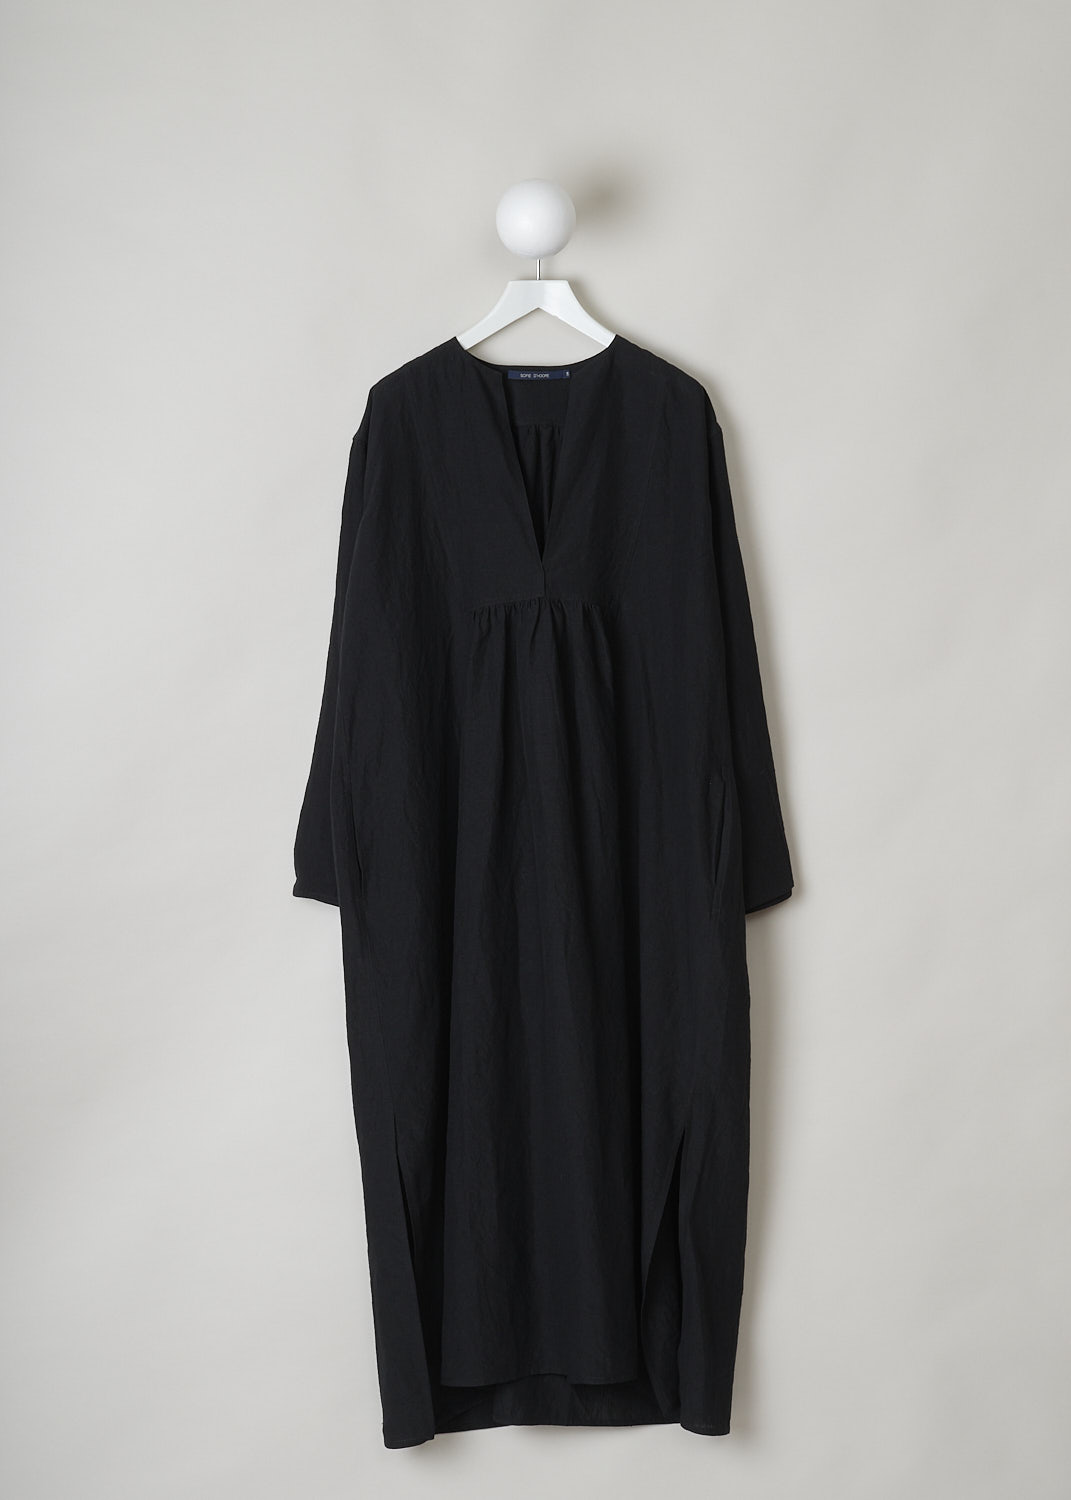 SOFIE D’HOORE, BLACK LINEN DELIZA DRESS, DELIZA_LIFE_BLACK, Black, Front,This black linen dress has a round neckline that goes into a deep V cutout. Subtle ruching can be found beneath the V. This long sleeve midi dress has a straight hemline with an asymmetrical finish, meaning the back is a little longer than the front. The dress has concealed slanted pockets and slits can be found on either side. The dress has a wide silhouette. 
